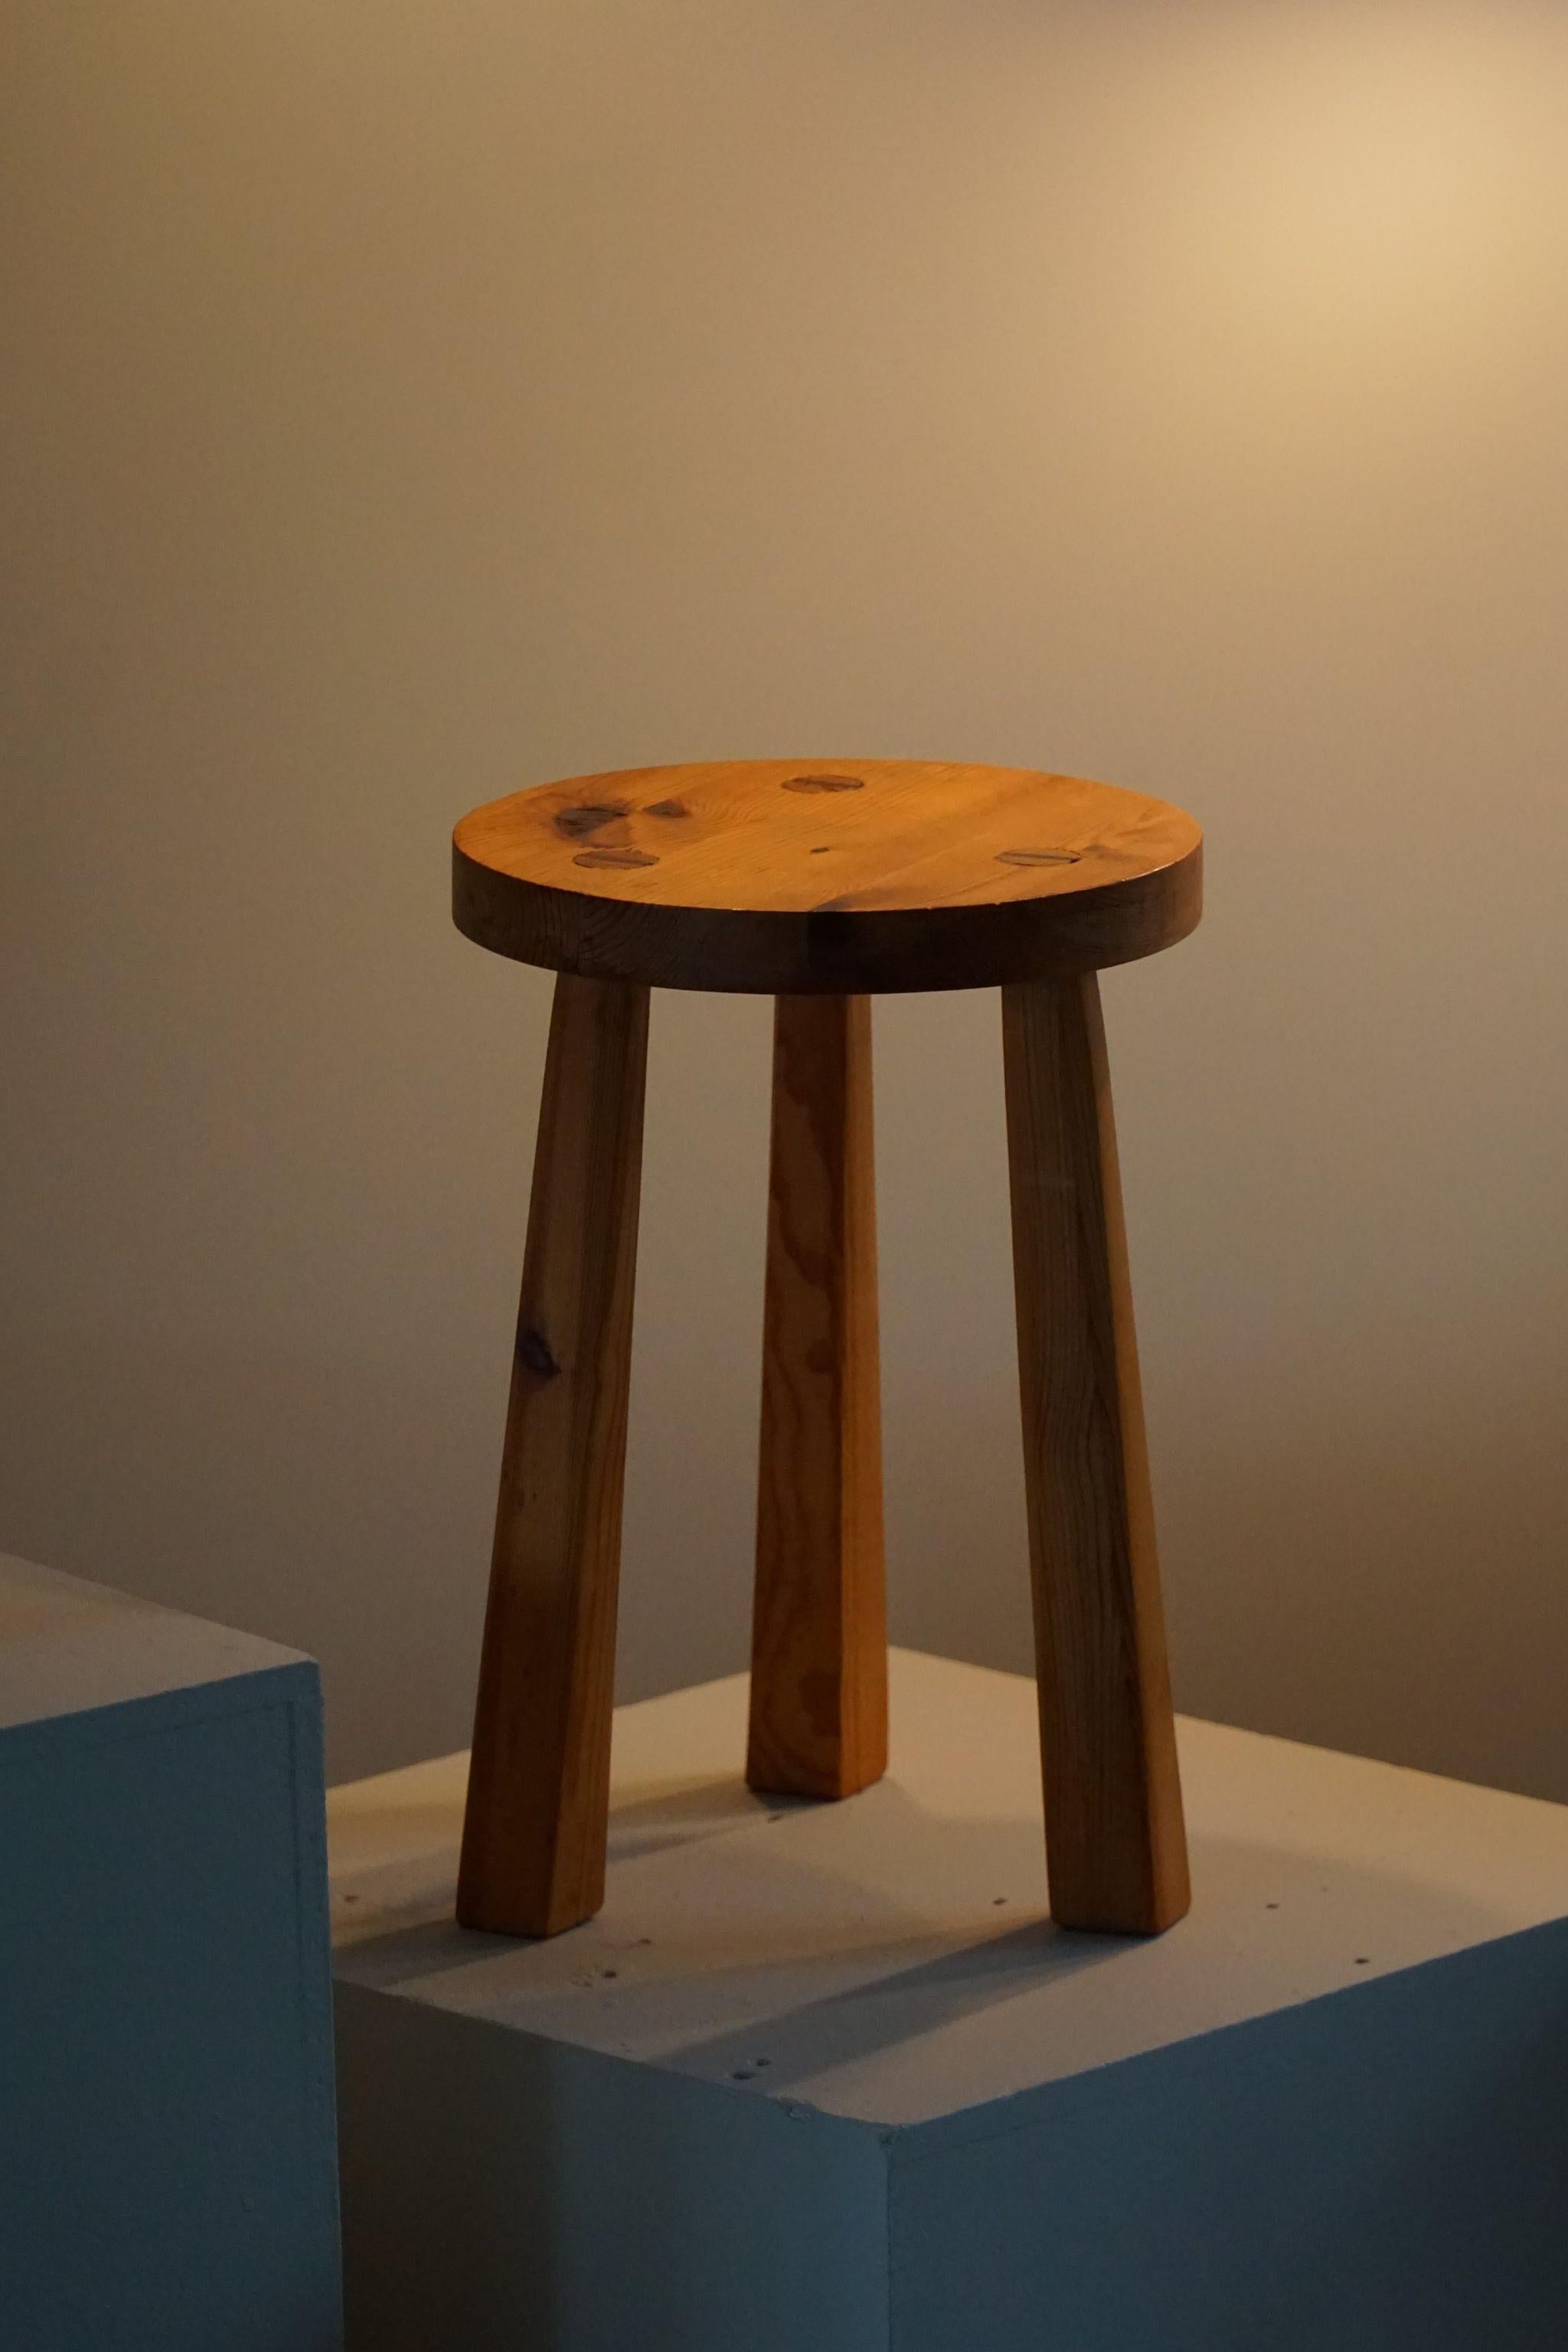 Pair of Tripod Stools in Pine, by Swedish Cabinetmaker, Mid Century, Ca 1960s In Good Condition For Sale In Odense, DK